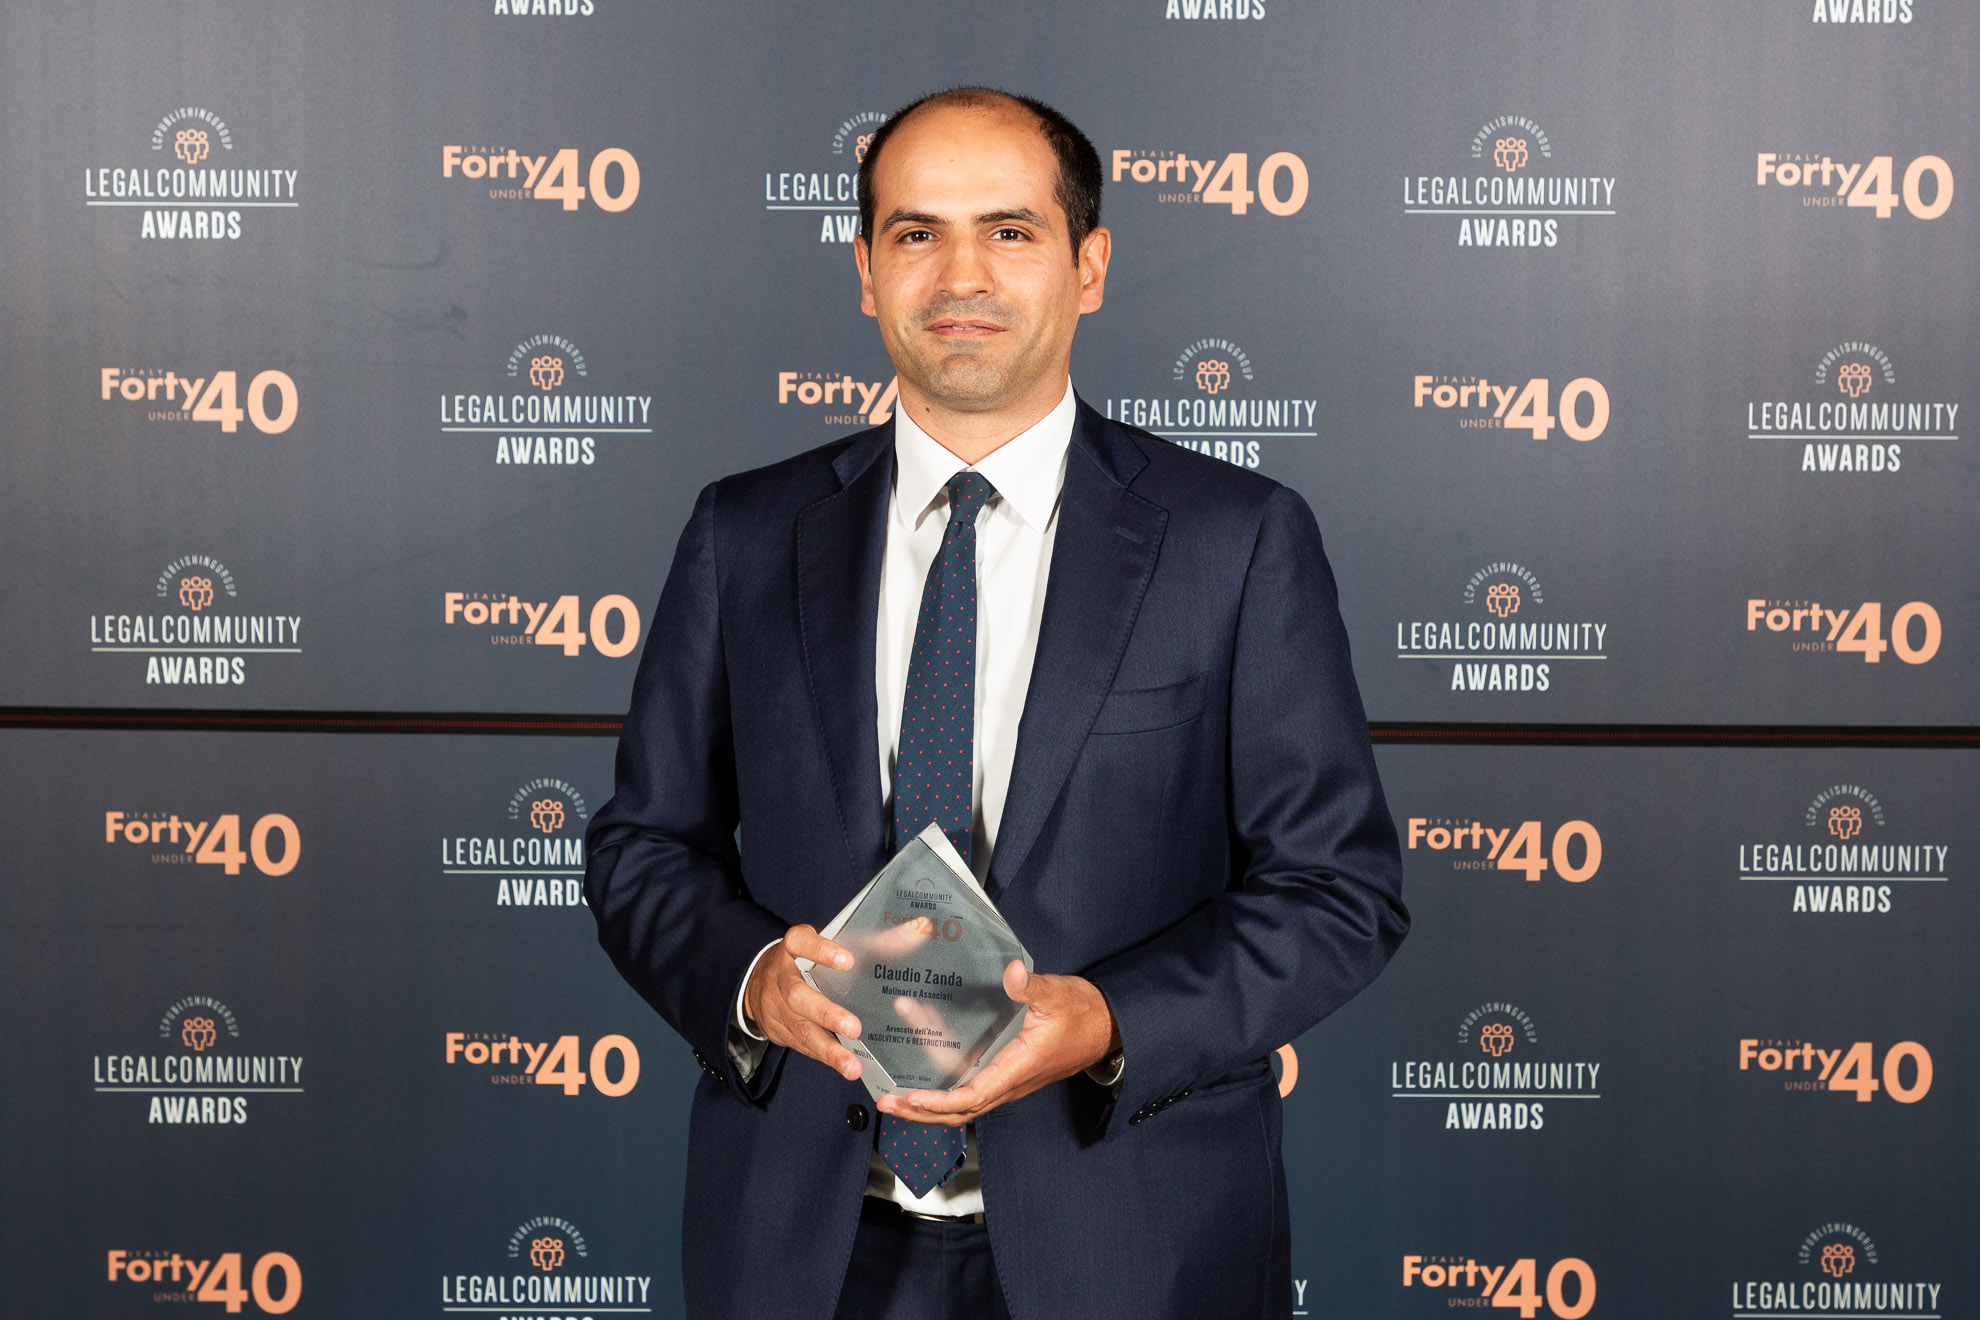 Claudio Zanda named Lawyer of the Year Insolvency & Restructuring at the 2021 Legalcommunity Forty Under 40 Awards